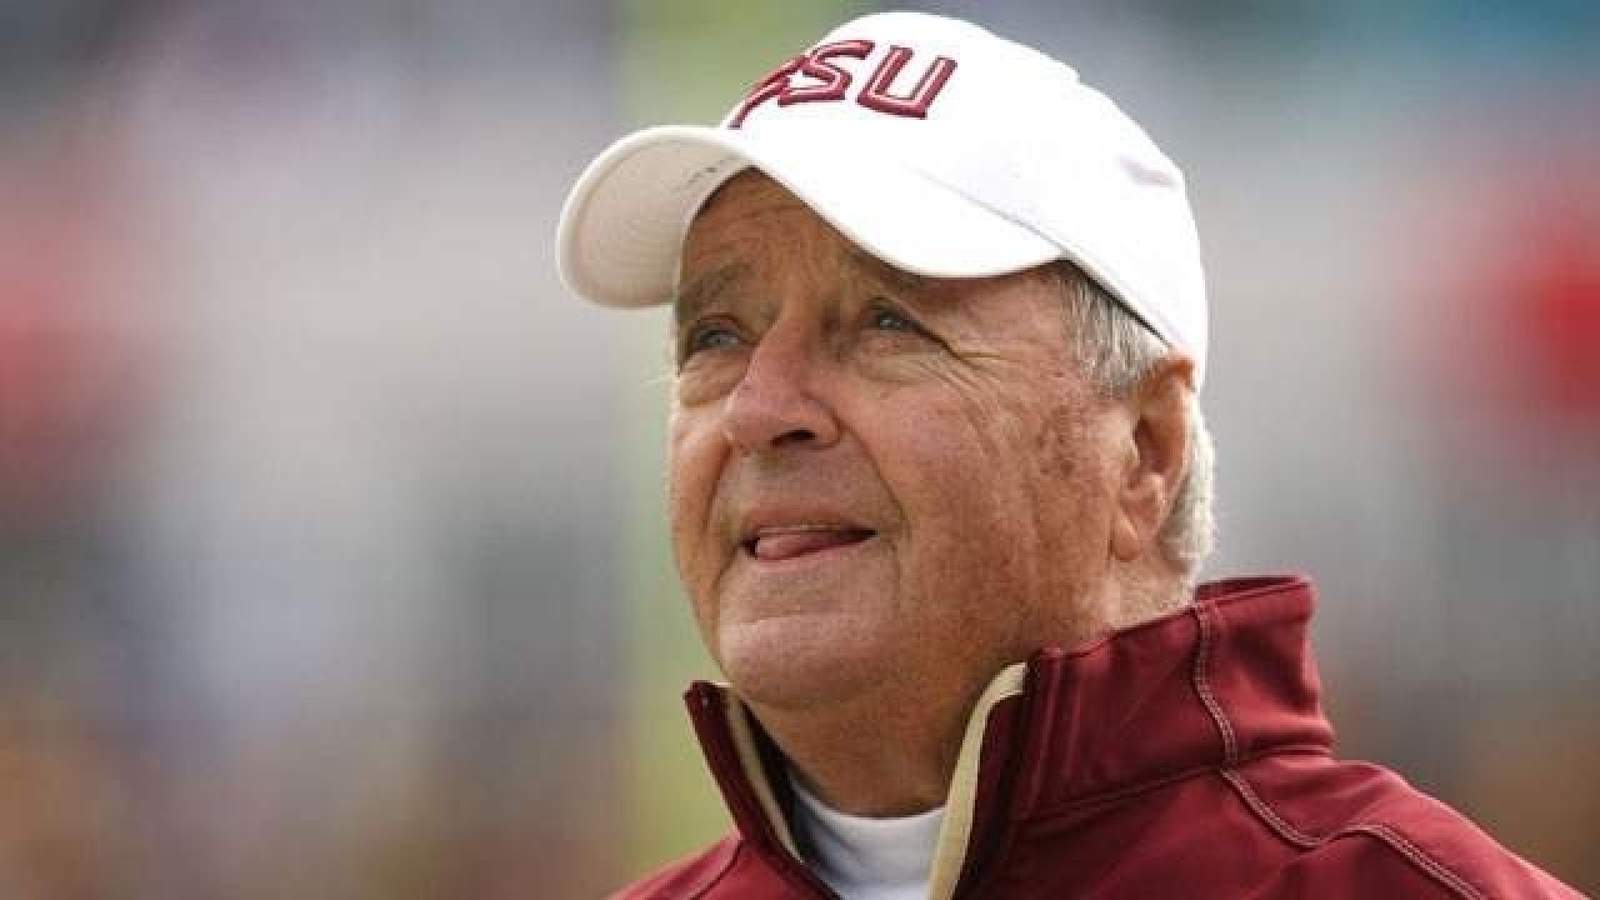 Bobby Bowden hospitalized with COVID-19, report says